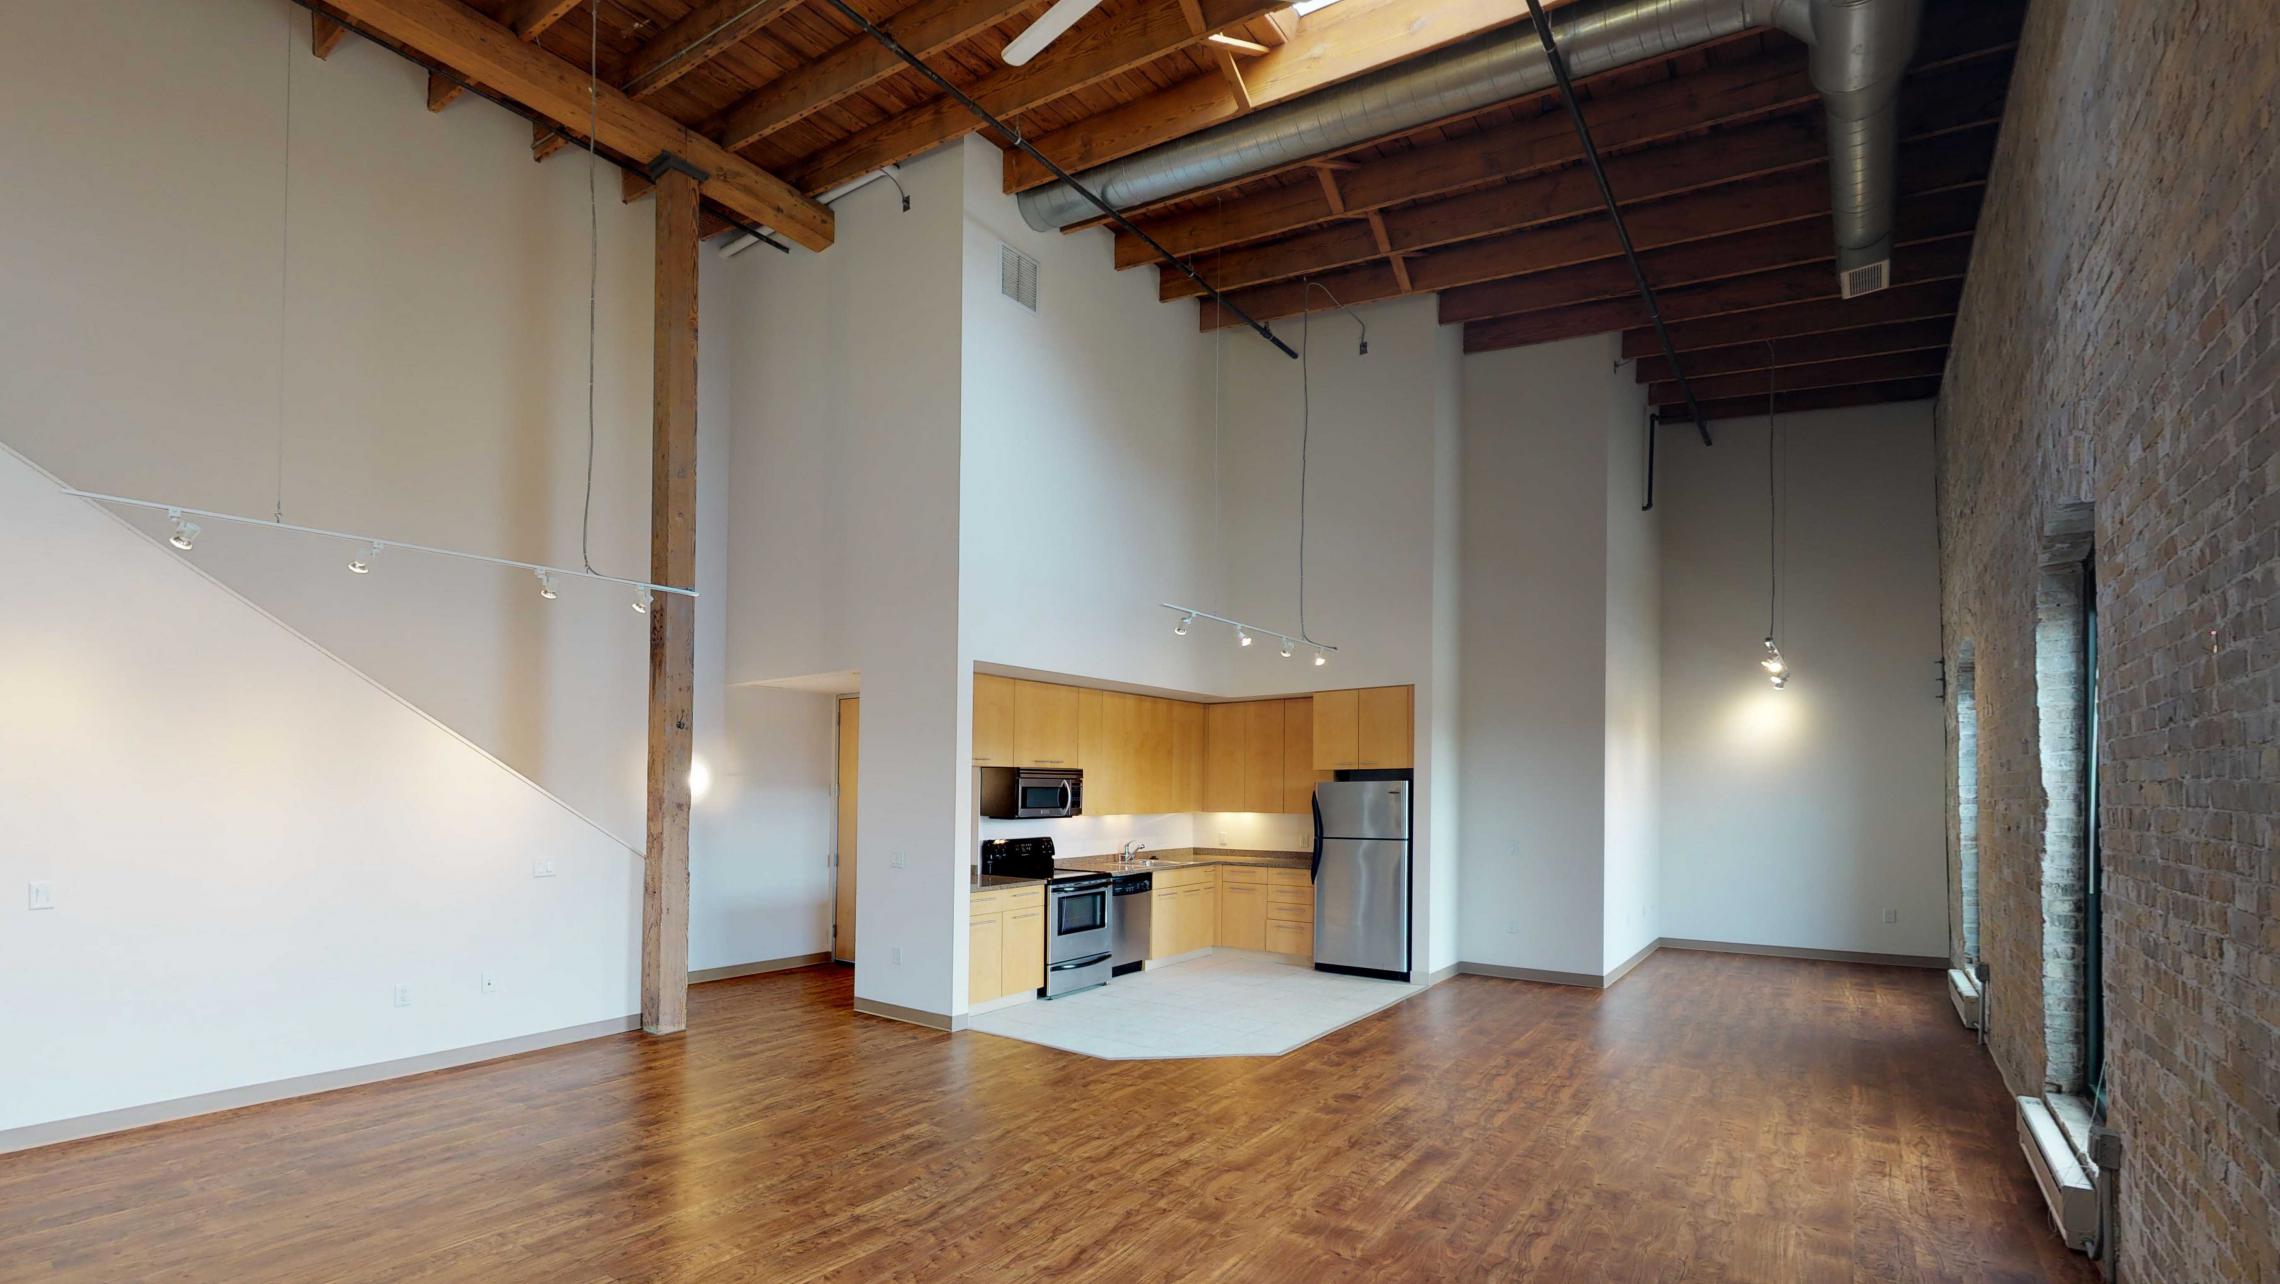 Tobacco-Lofts-Apartment-E306-Historic-Lofted-Two-Bedroom-Downtown-Madison-Yards-Exposures-Brick-Design.jpg